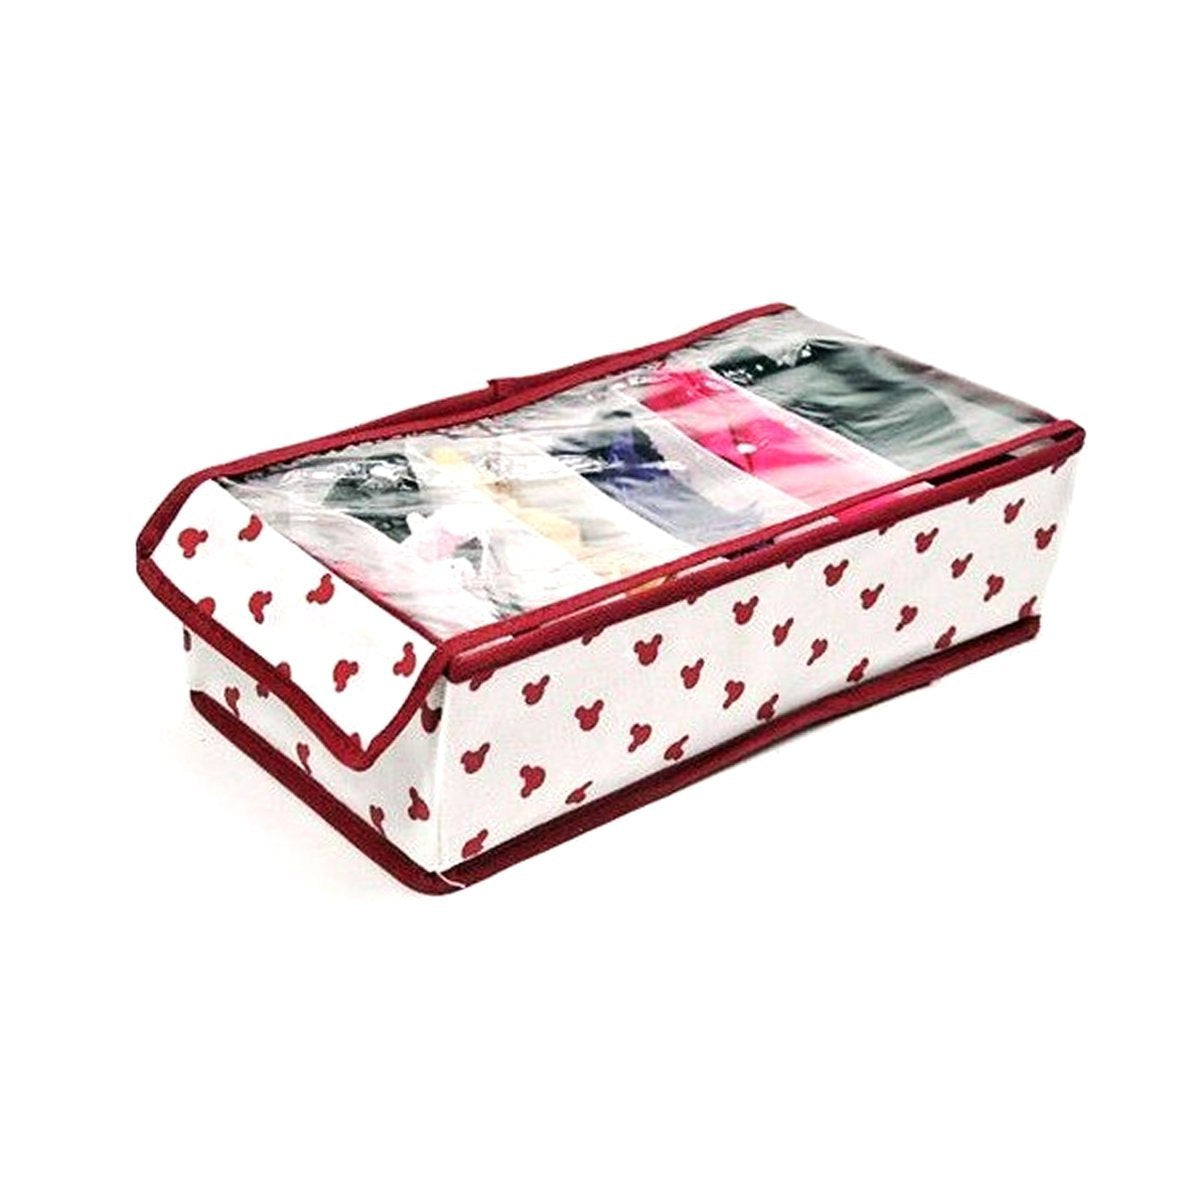 3 Set Foldable Storage Box with Cover